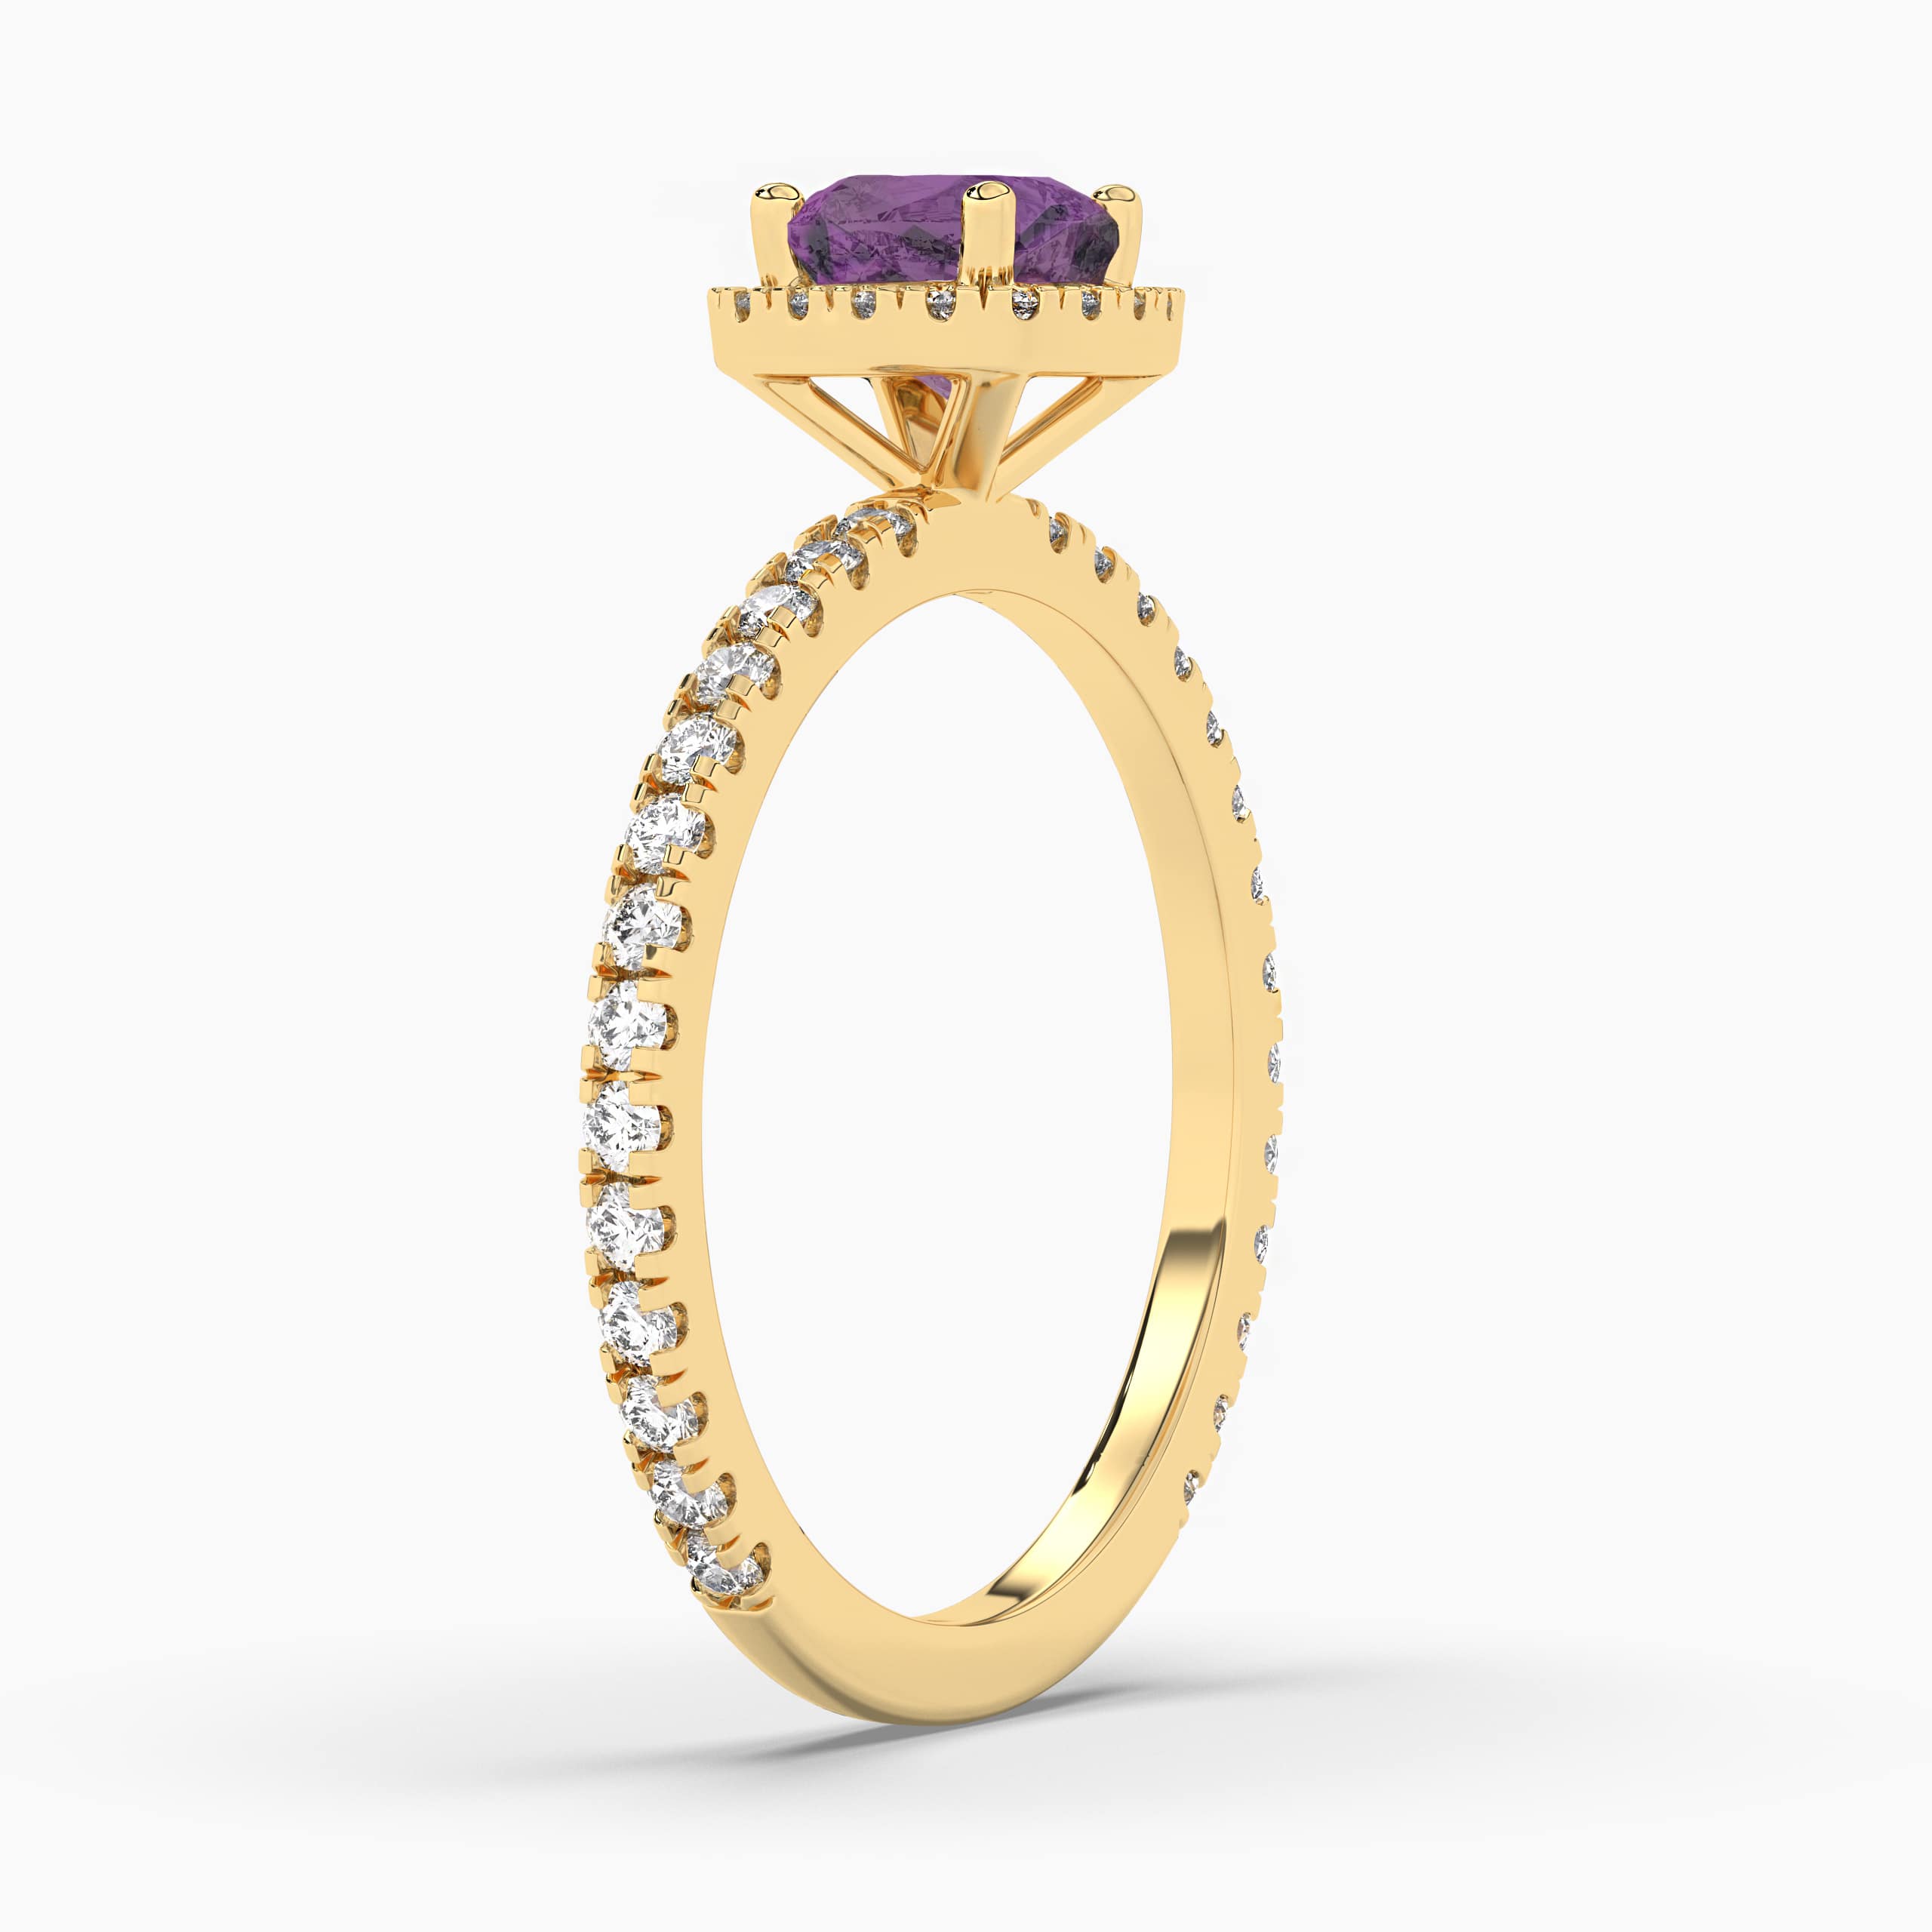 Cushion Cut Amethyst and Diamond Ring in yellow gold 